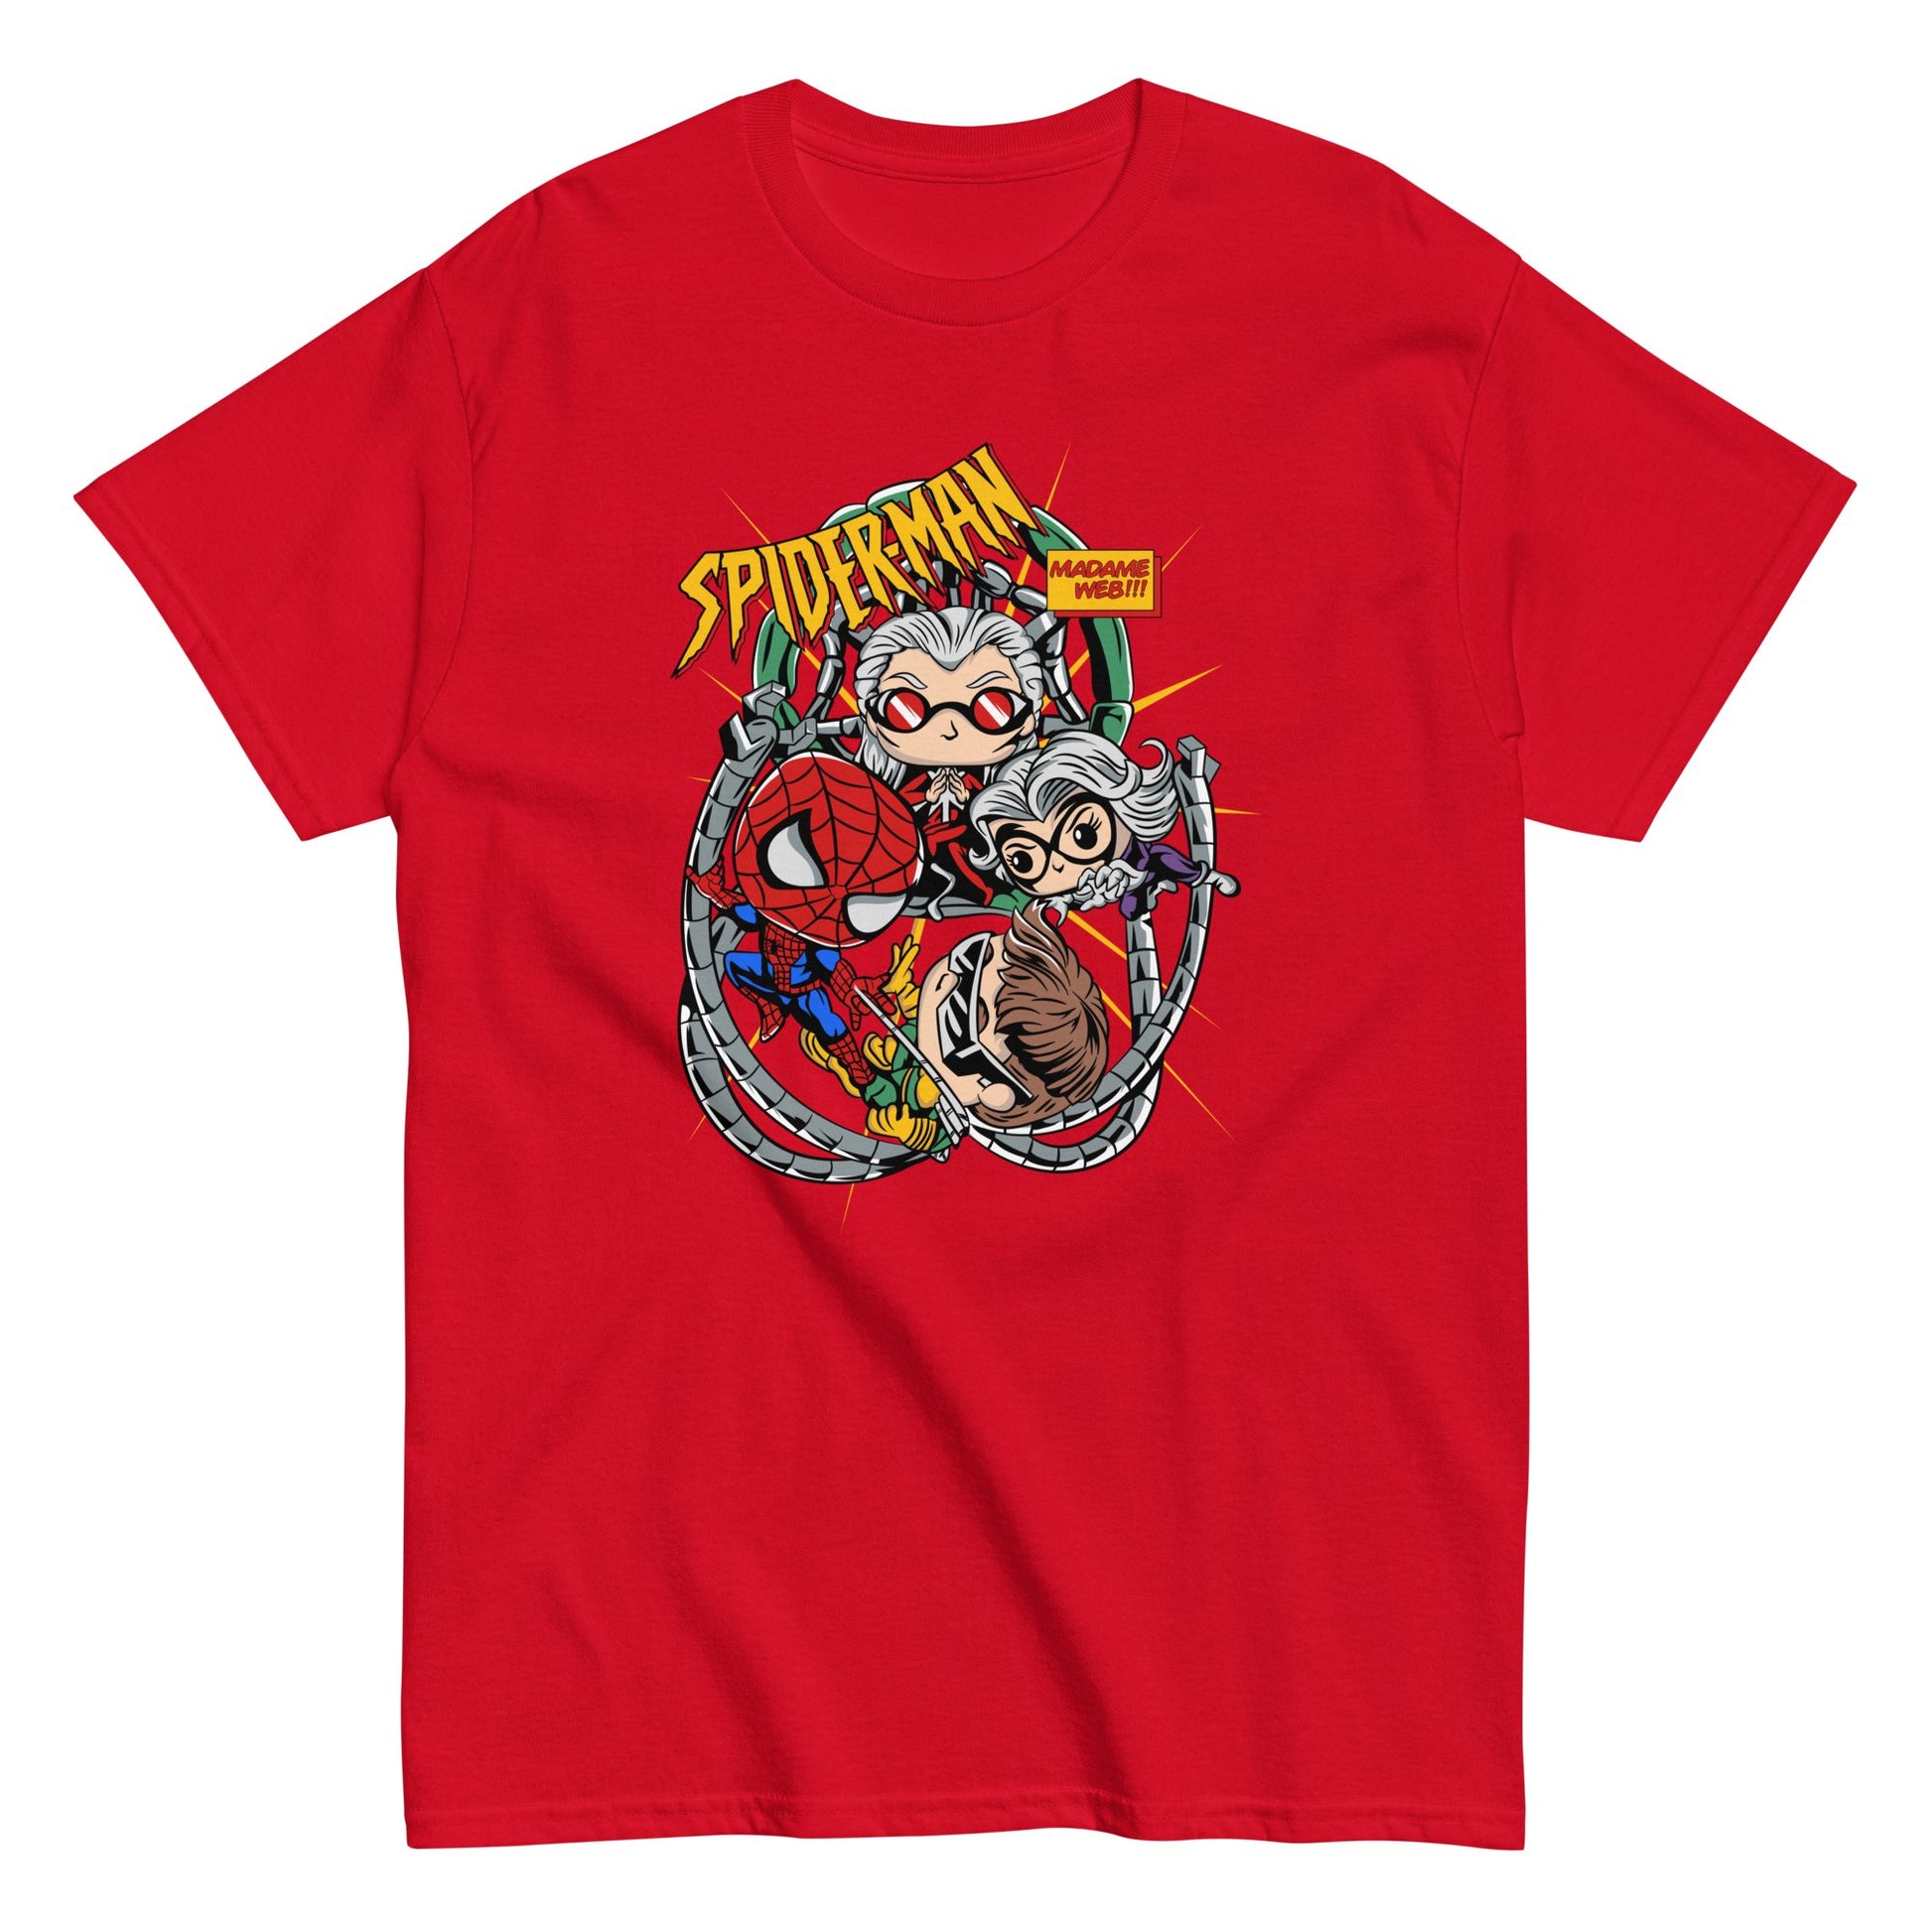 Explore Marvel Magic with Our Exclusive Spider-Man Graphic Tees - The Truth Graphics